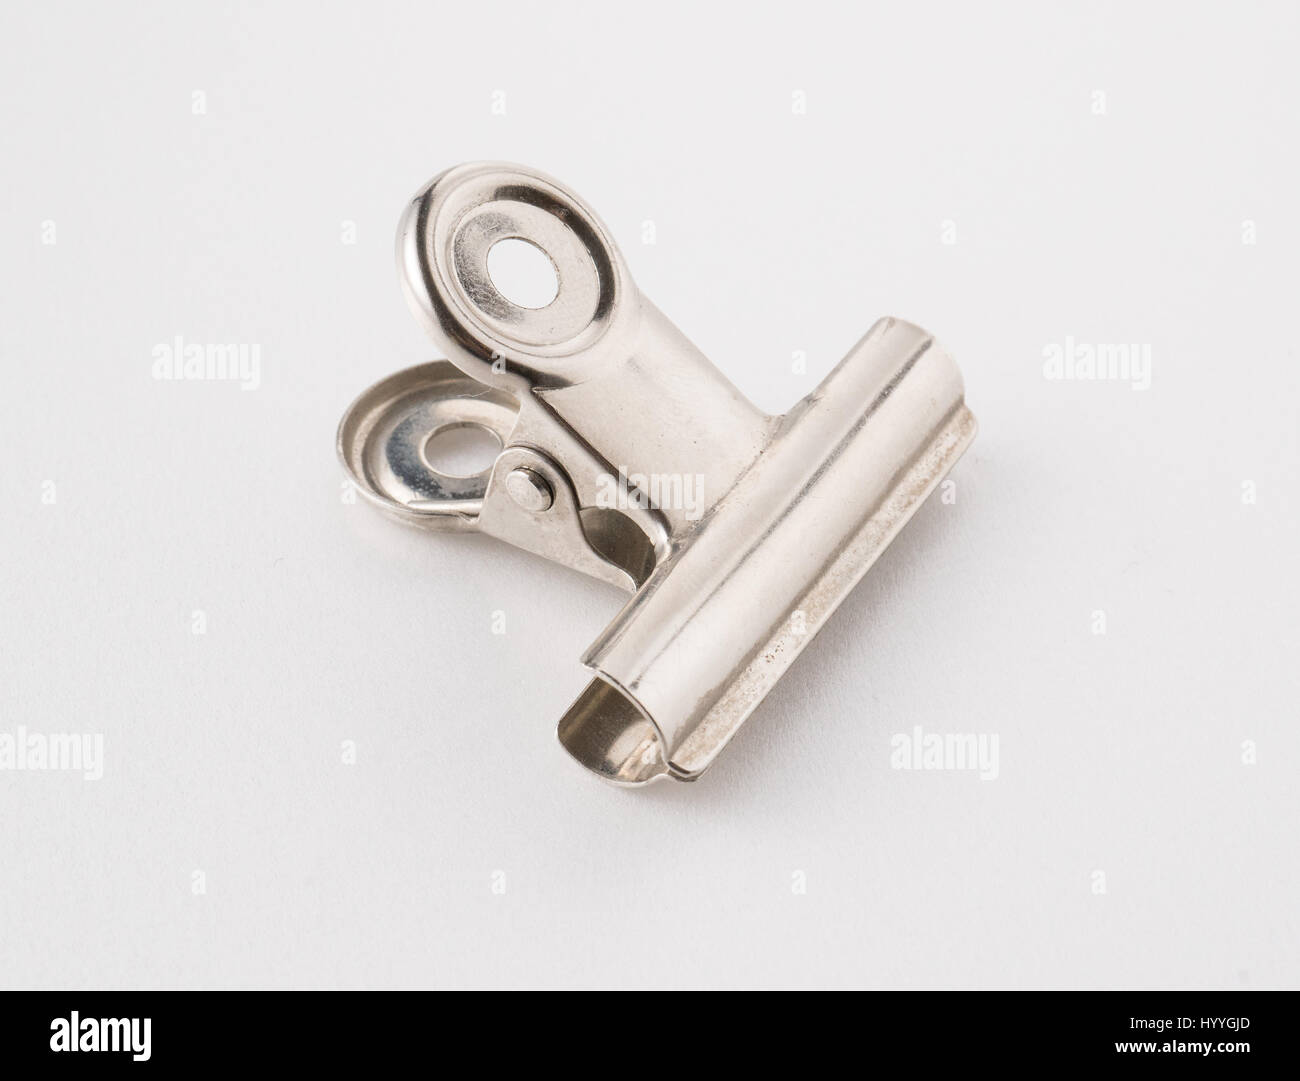 A metal paperclip on a white background. Stock Photo